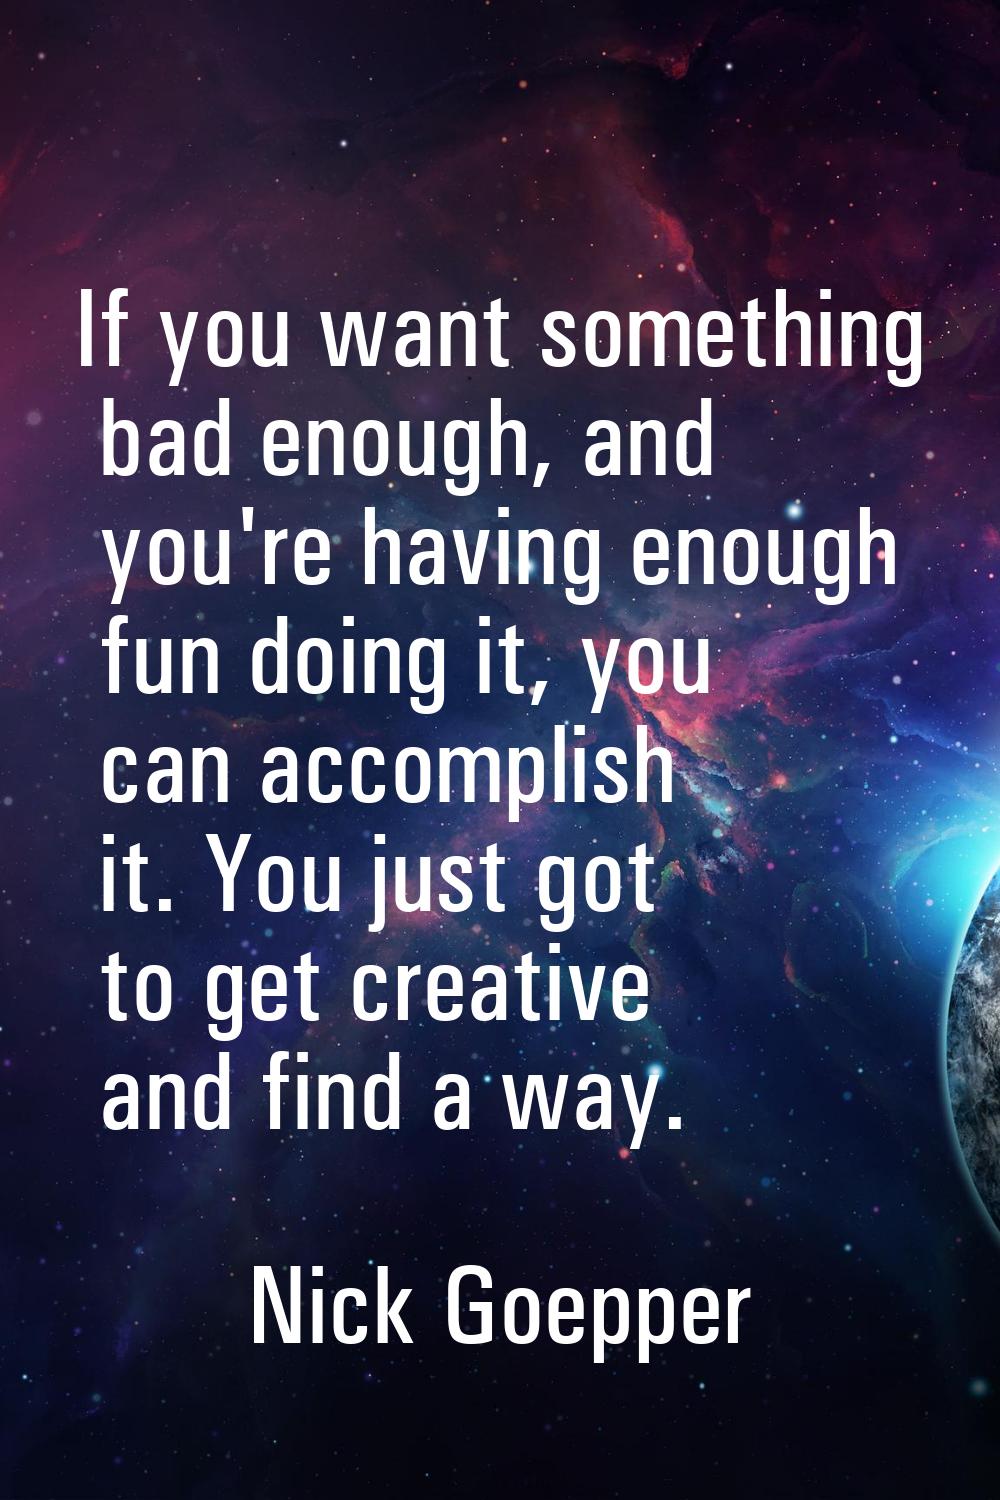 If you want something bad enough, and you're having enough fun doing it, you can accomplish it. You